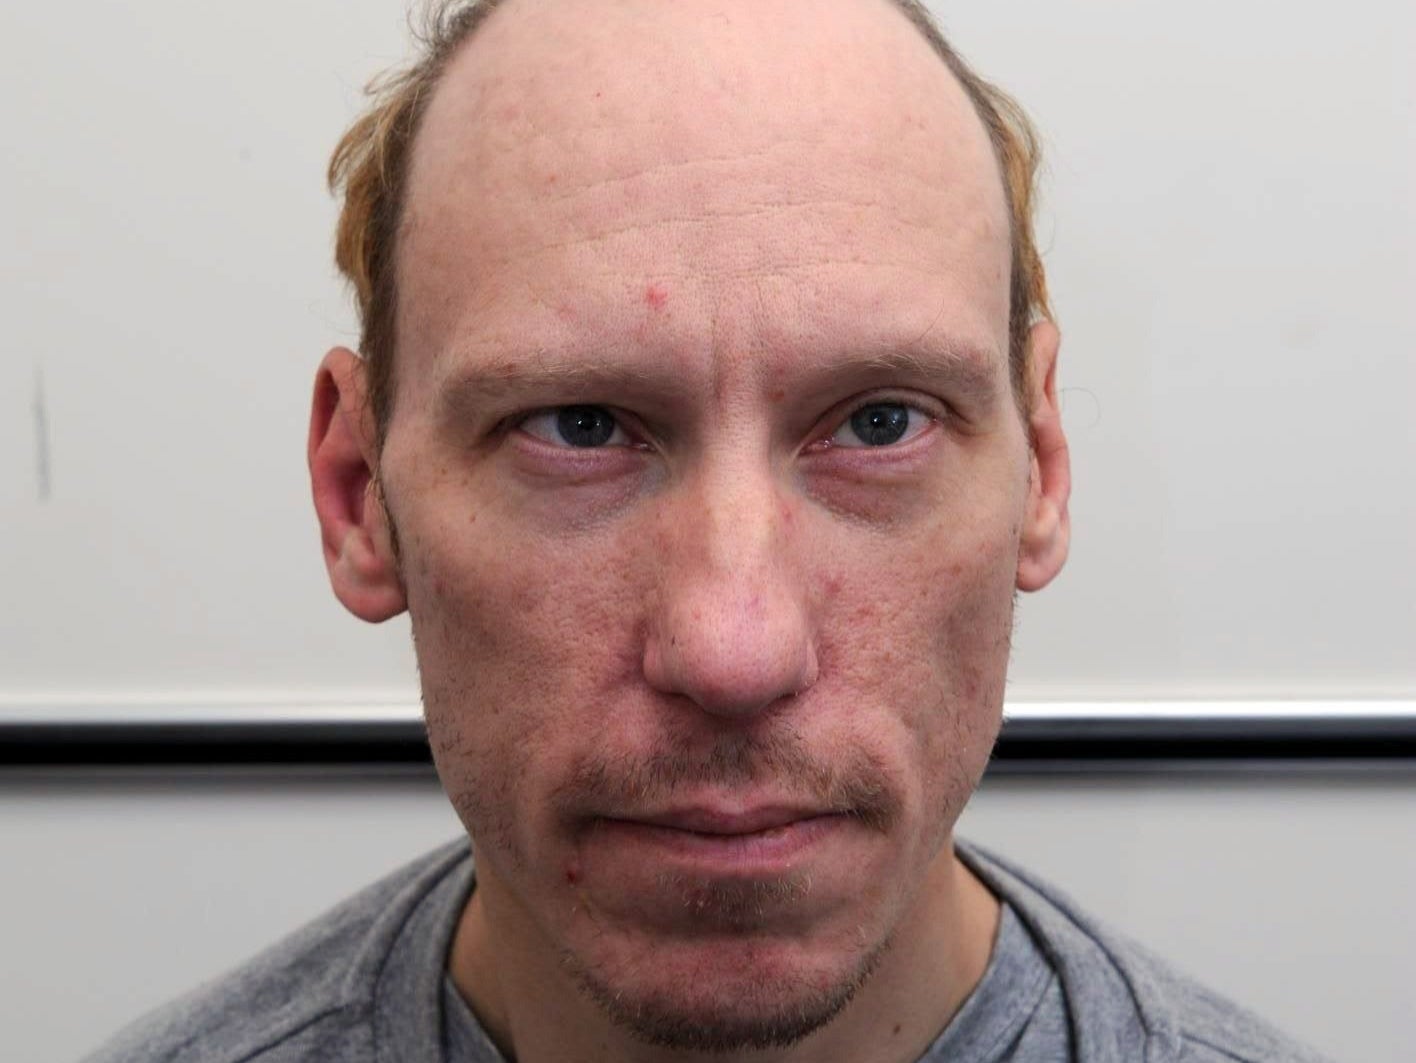 An inquest into the death of the victims of Stephen Port (pictured) is underway